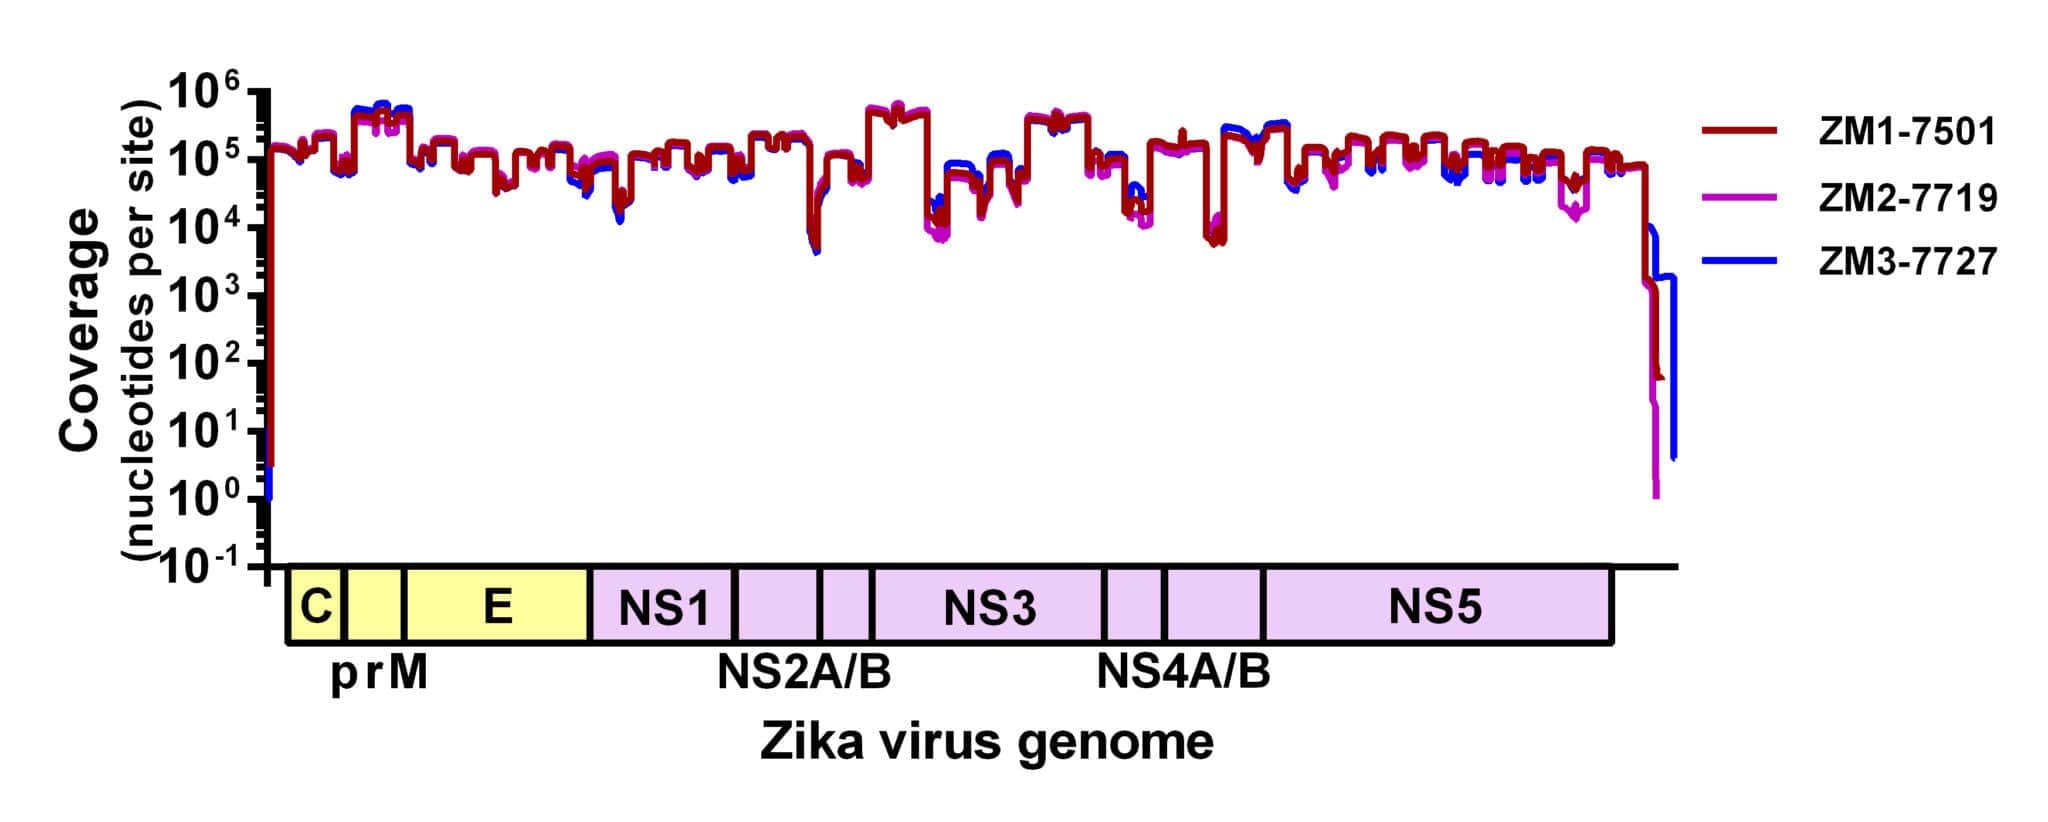 MiSeq protocol for Zika virus sequencing